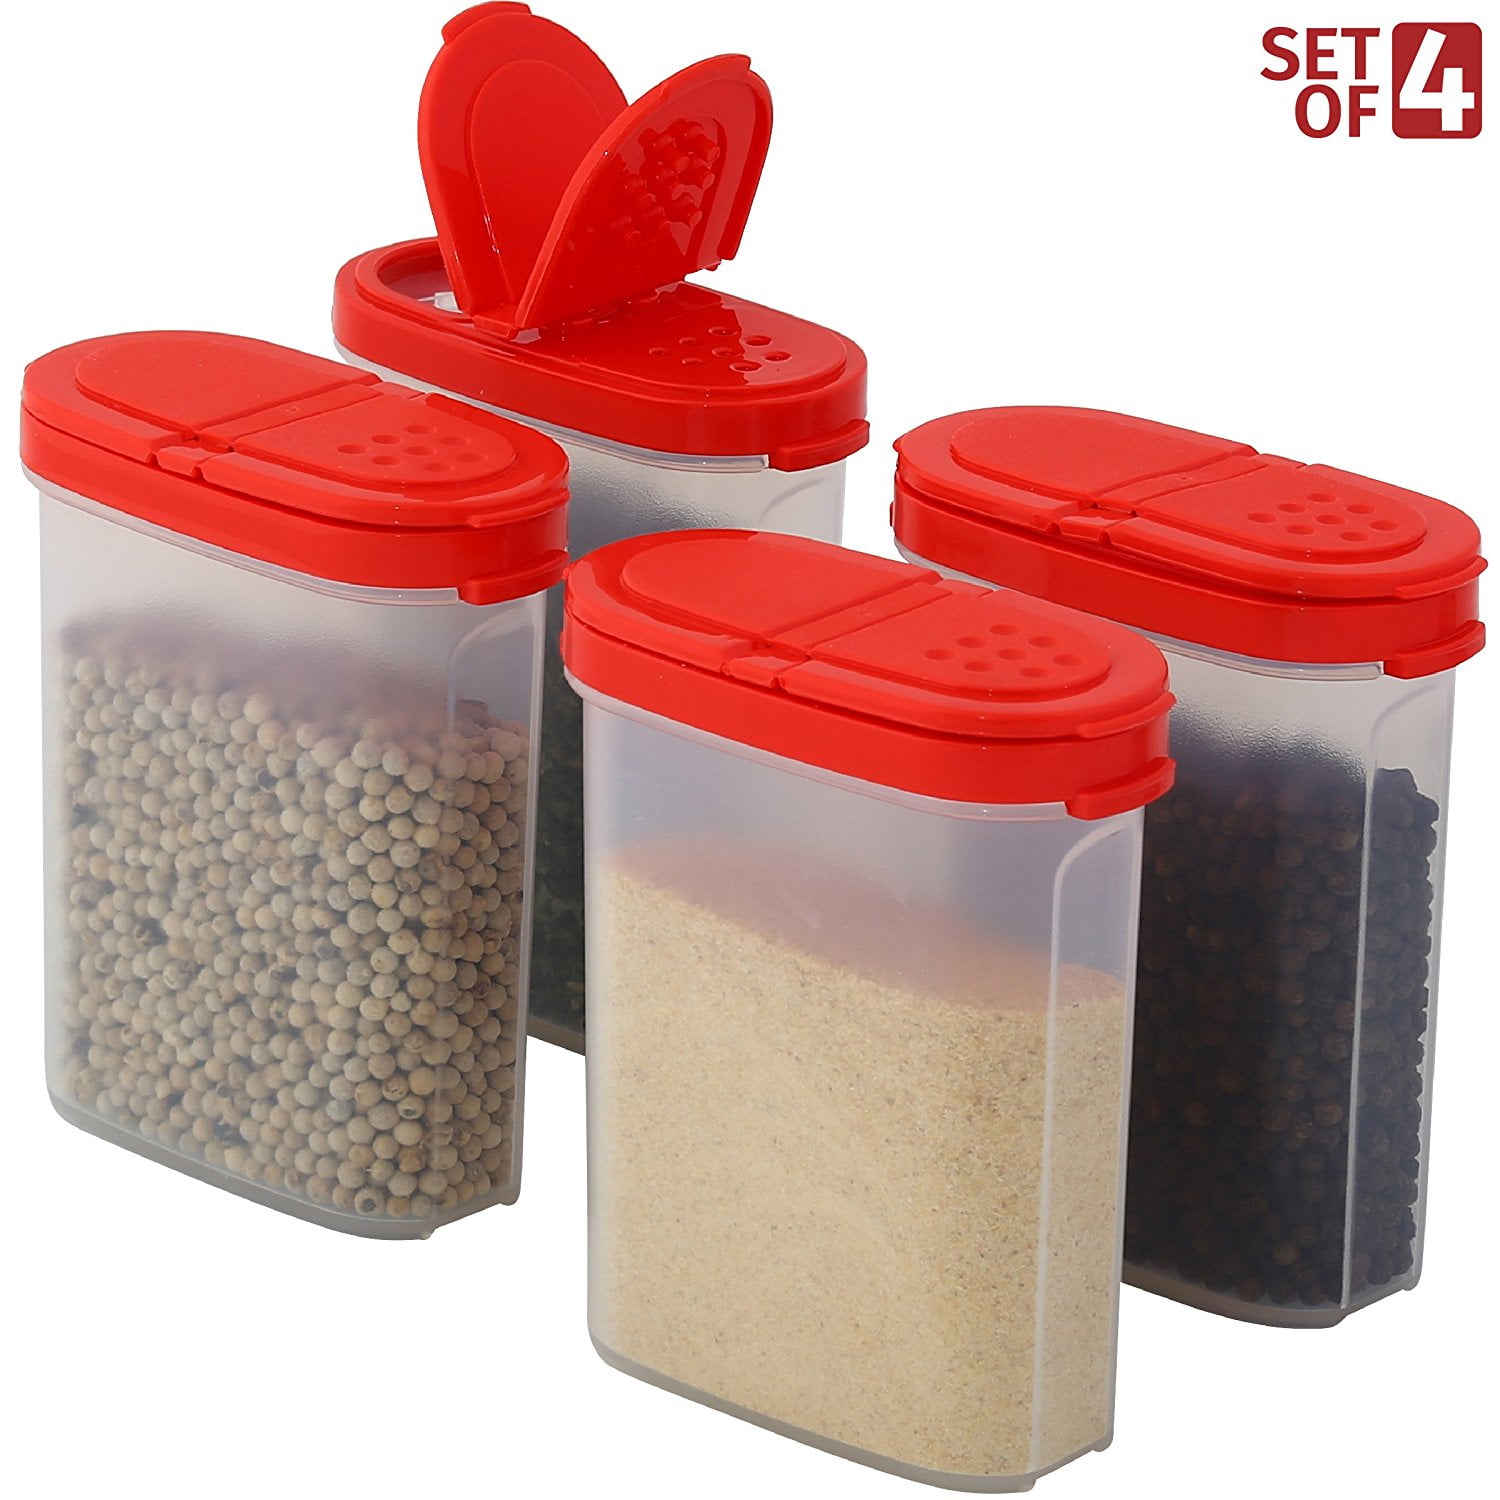 Signora Ware Spice Jars with Shaker Lids Refillable Seasoning